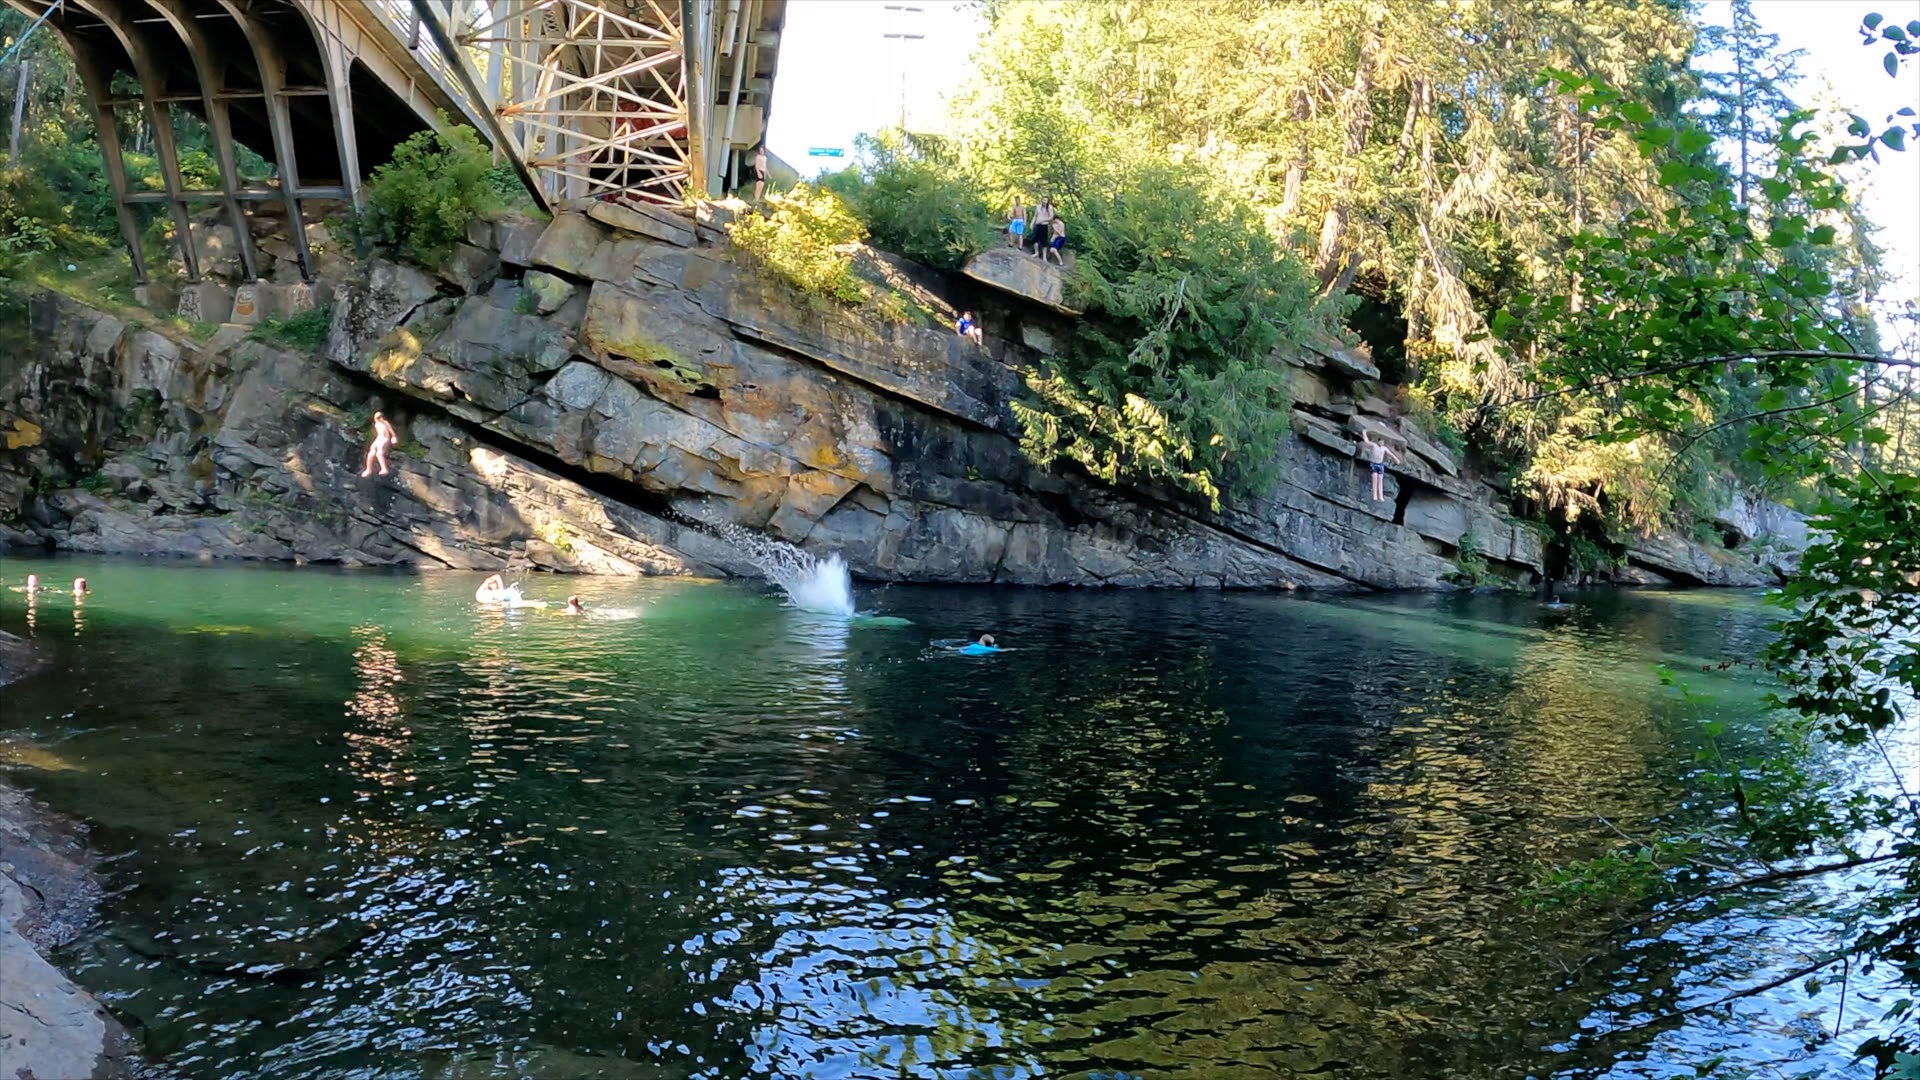 People jumping off cliffs into the Nanaimo River under a Trestle Bridge